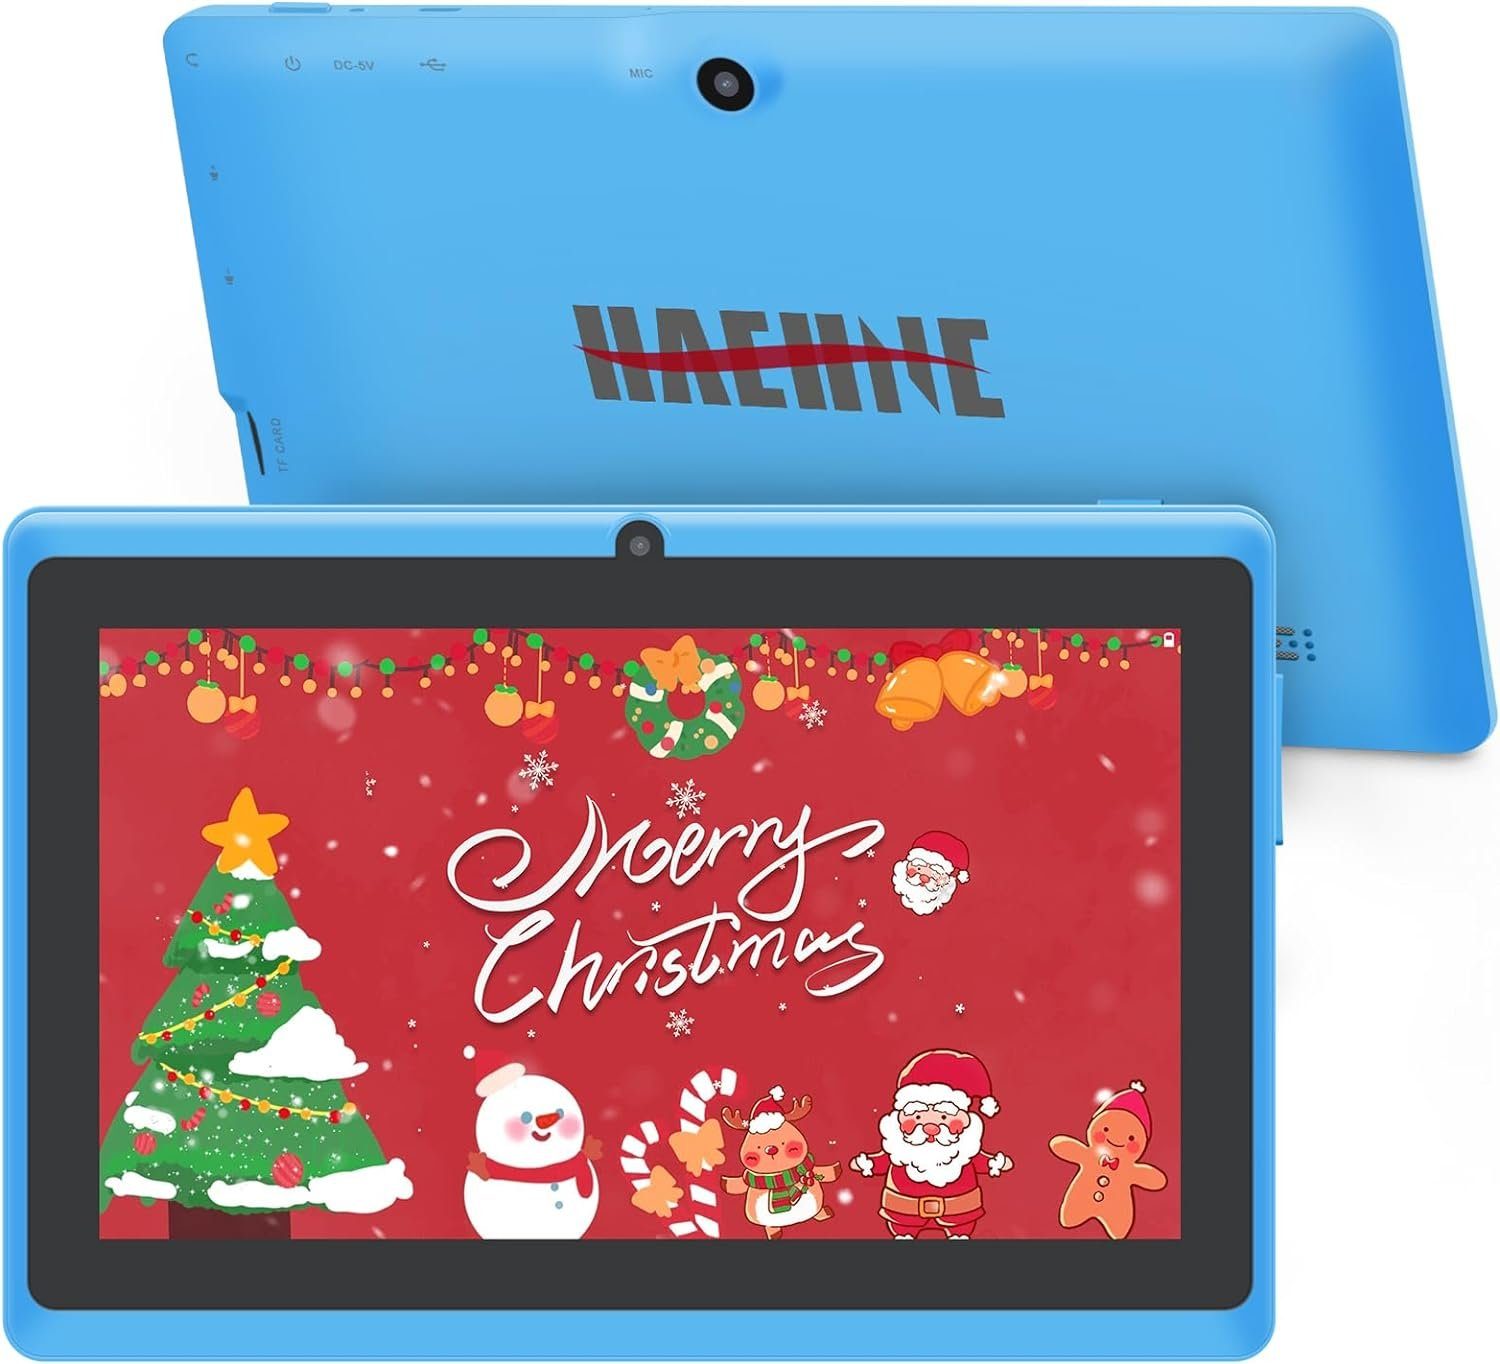 Haehne Q88 Tablet (7", 8 GB, Android 5, 2,4g, Tablet PC Quad Core A33,Dual Kameras, WiFi, Kapazitiven Touchscreen)